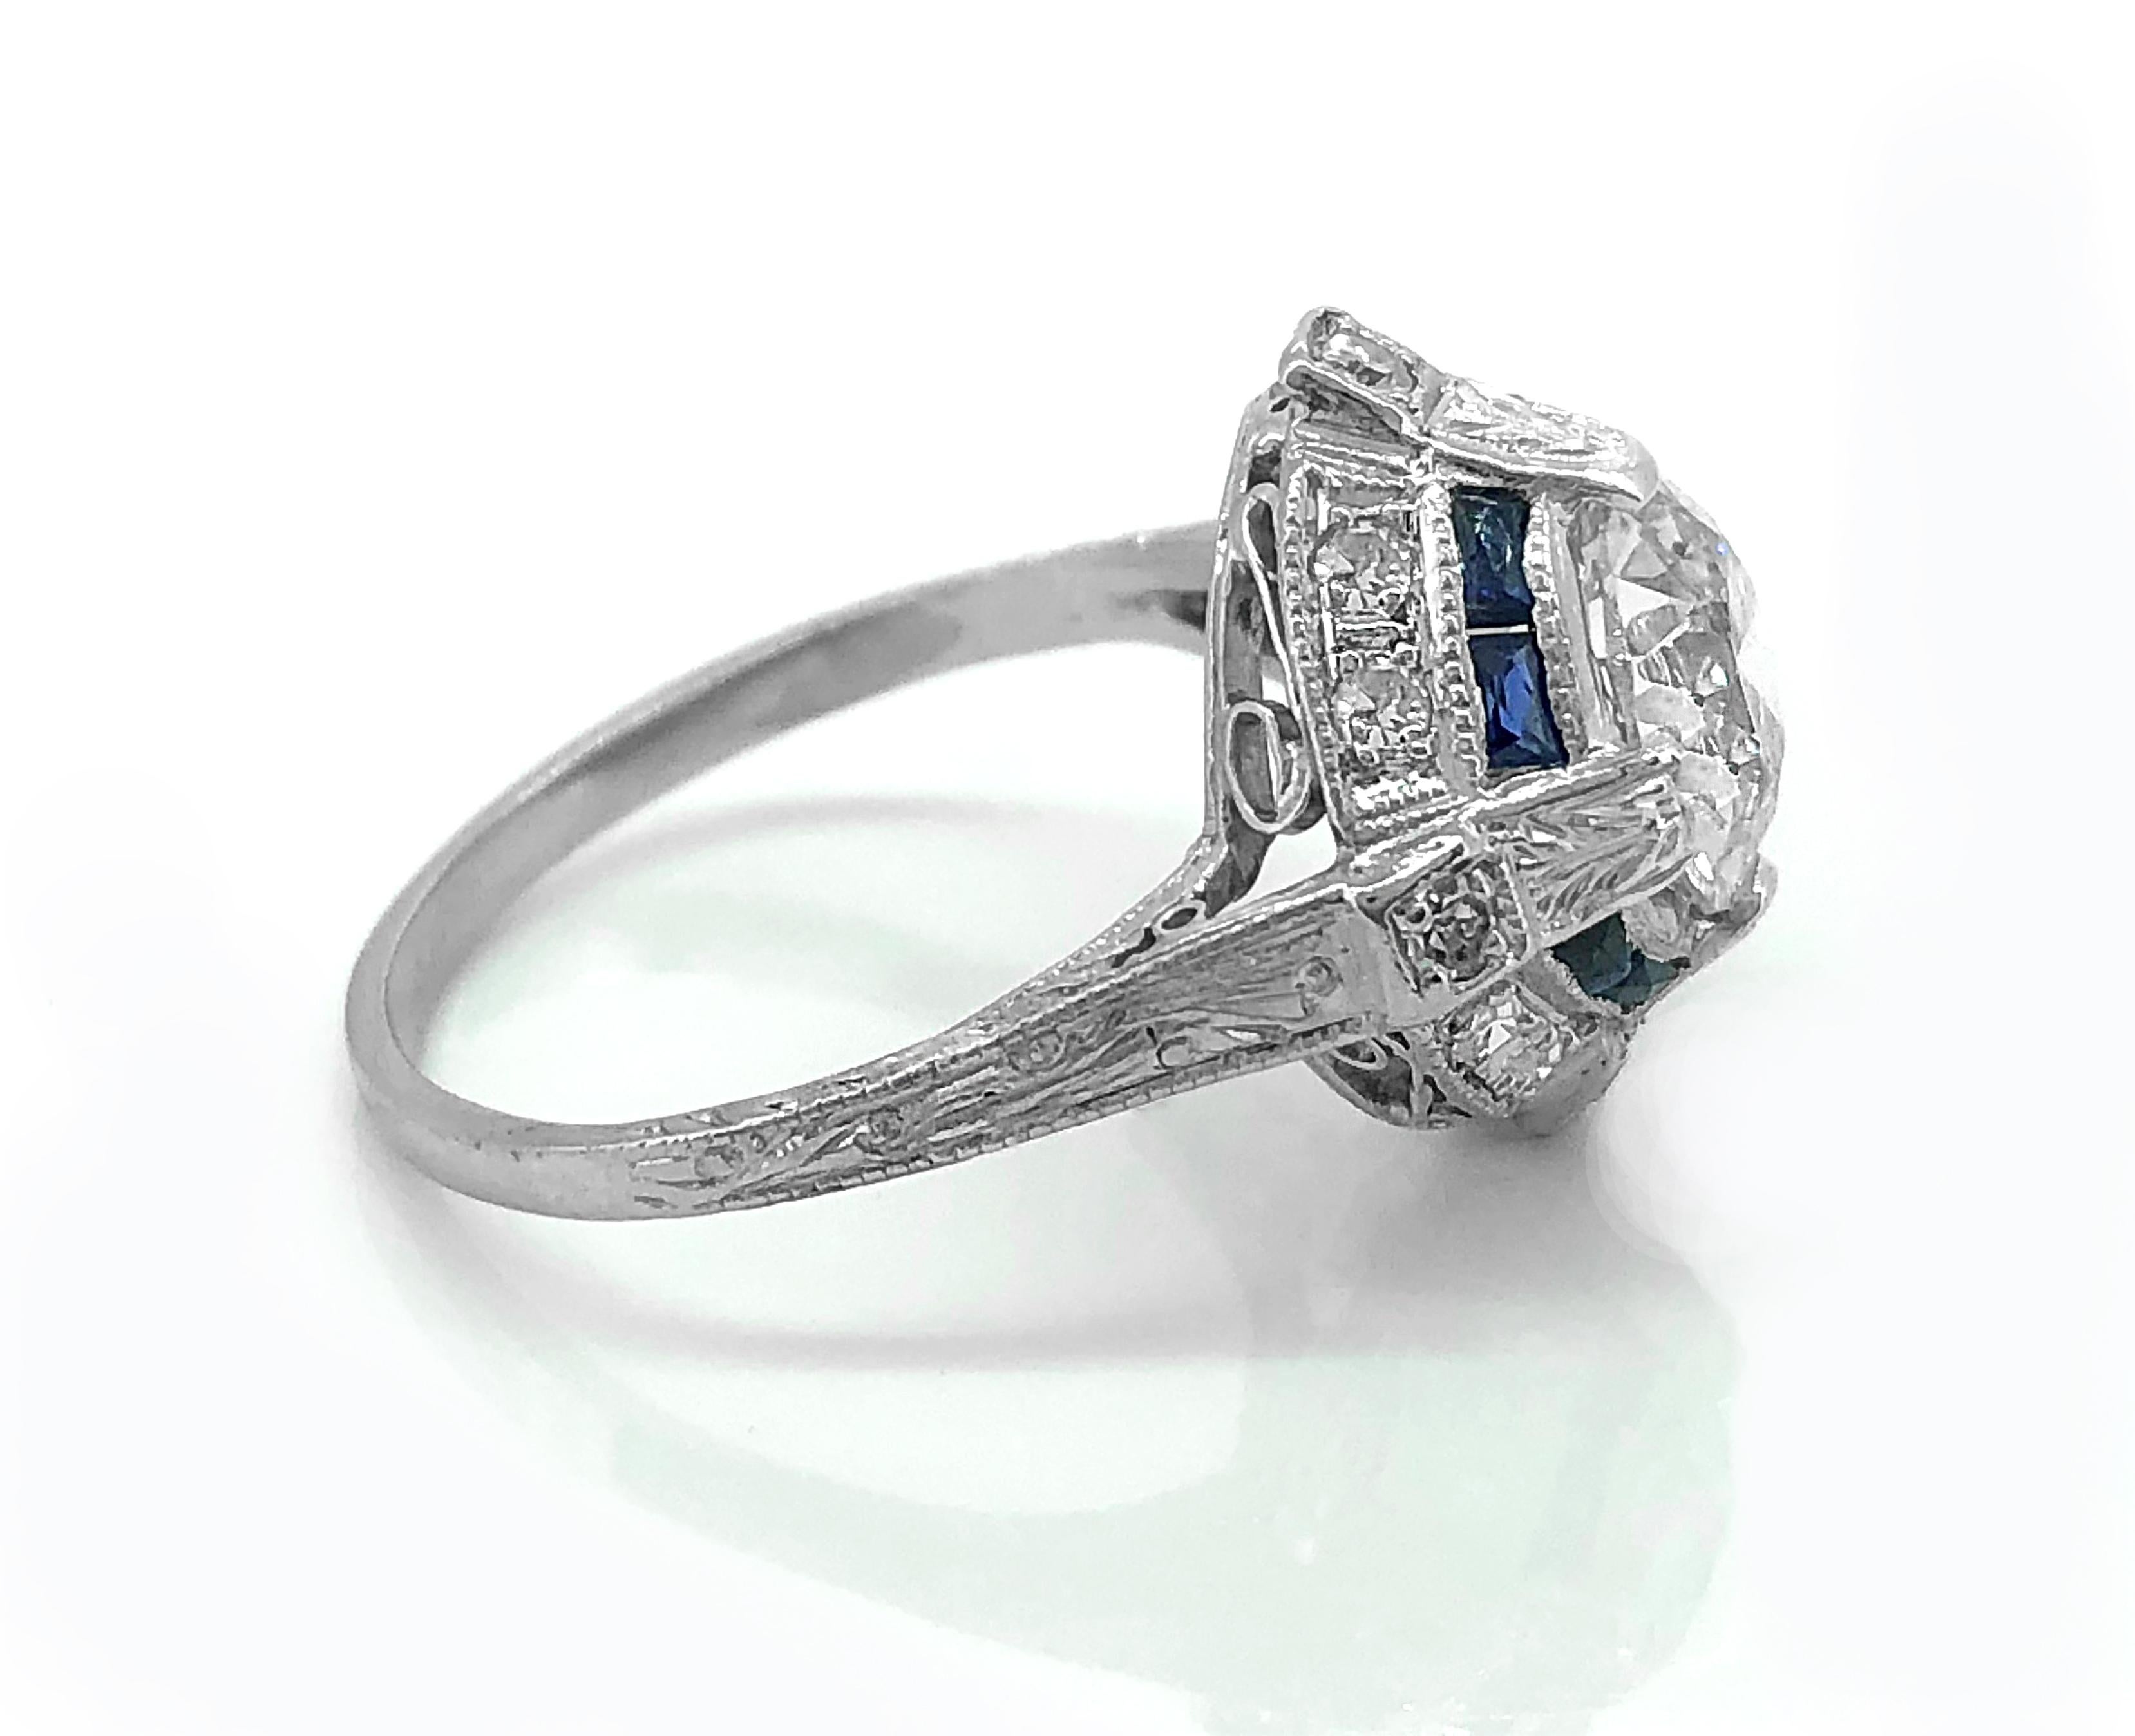 A dazzling Platinum Art Deco diamond Antique engagement ring features a 1.65ct. Apx. European cut diamond with VS2 clarity and J color. The center stone is surrounded by .50ct. T.W. Apx. of baguette cut blue sapphires. Additionally, there are .20ct.